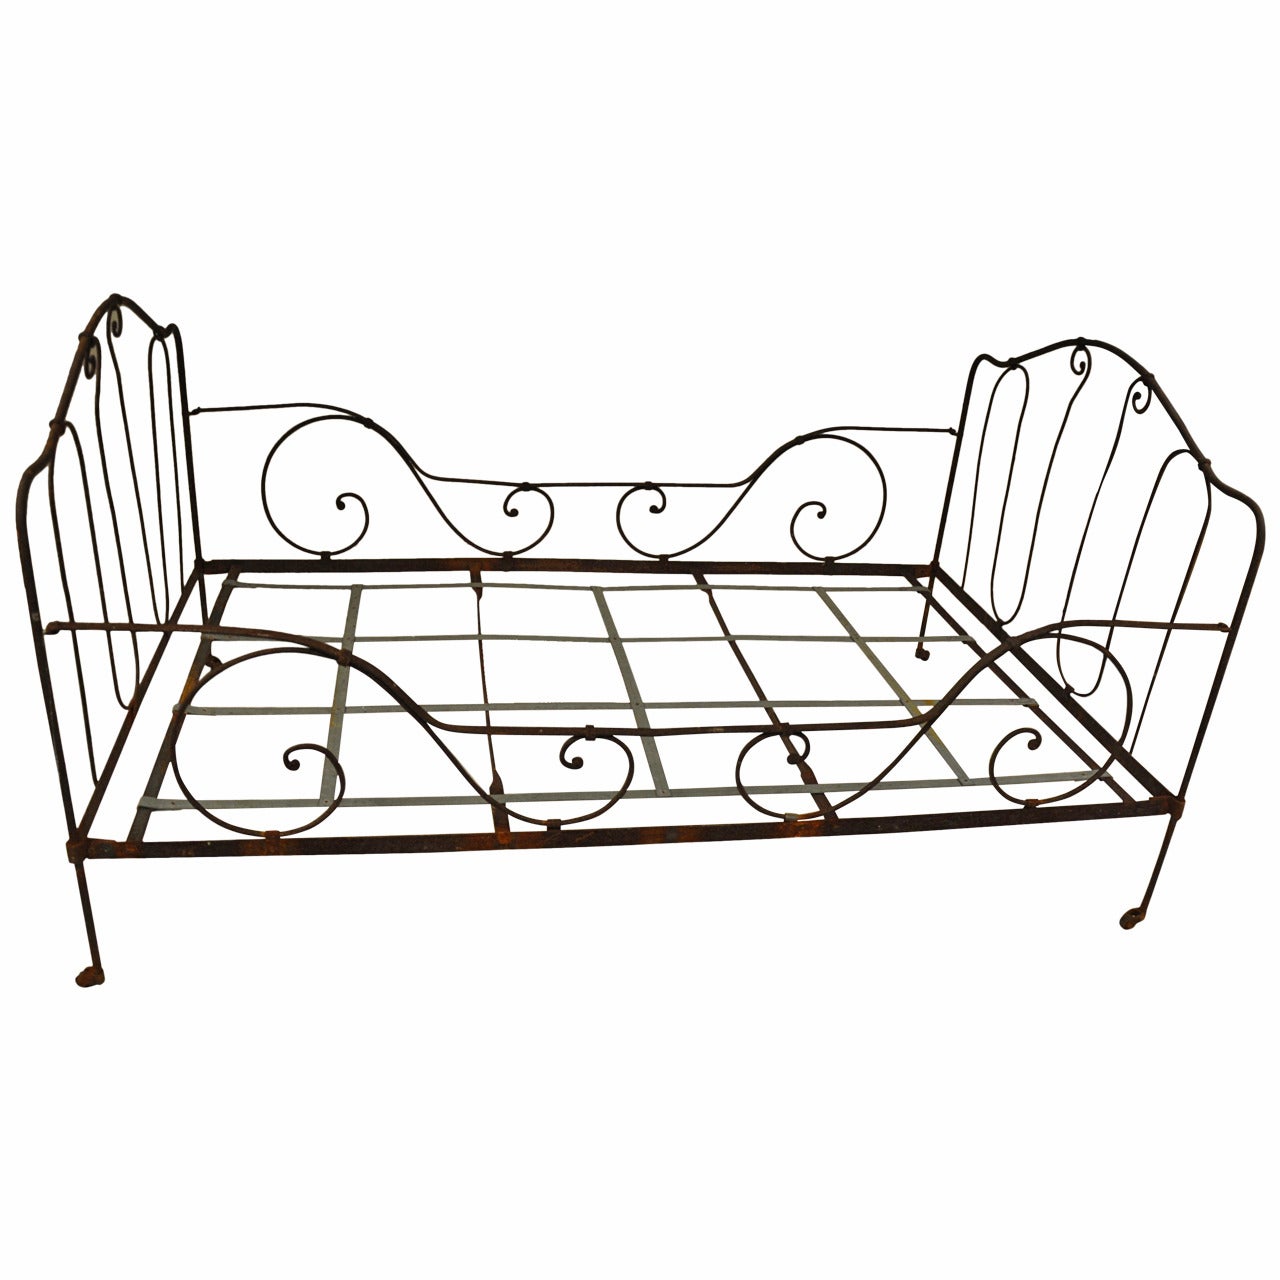 19th Century French Iron Bed For Sale